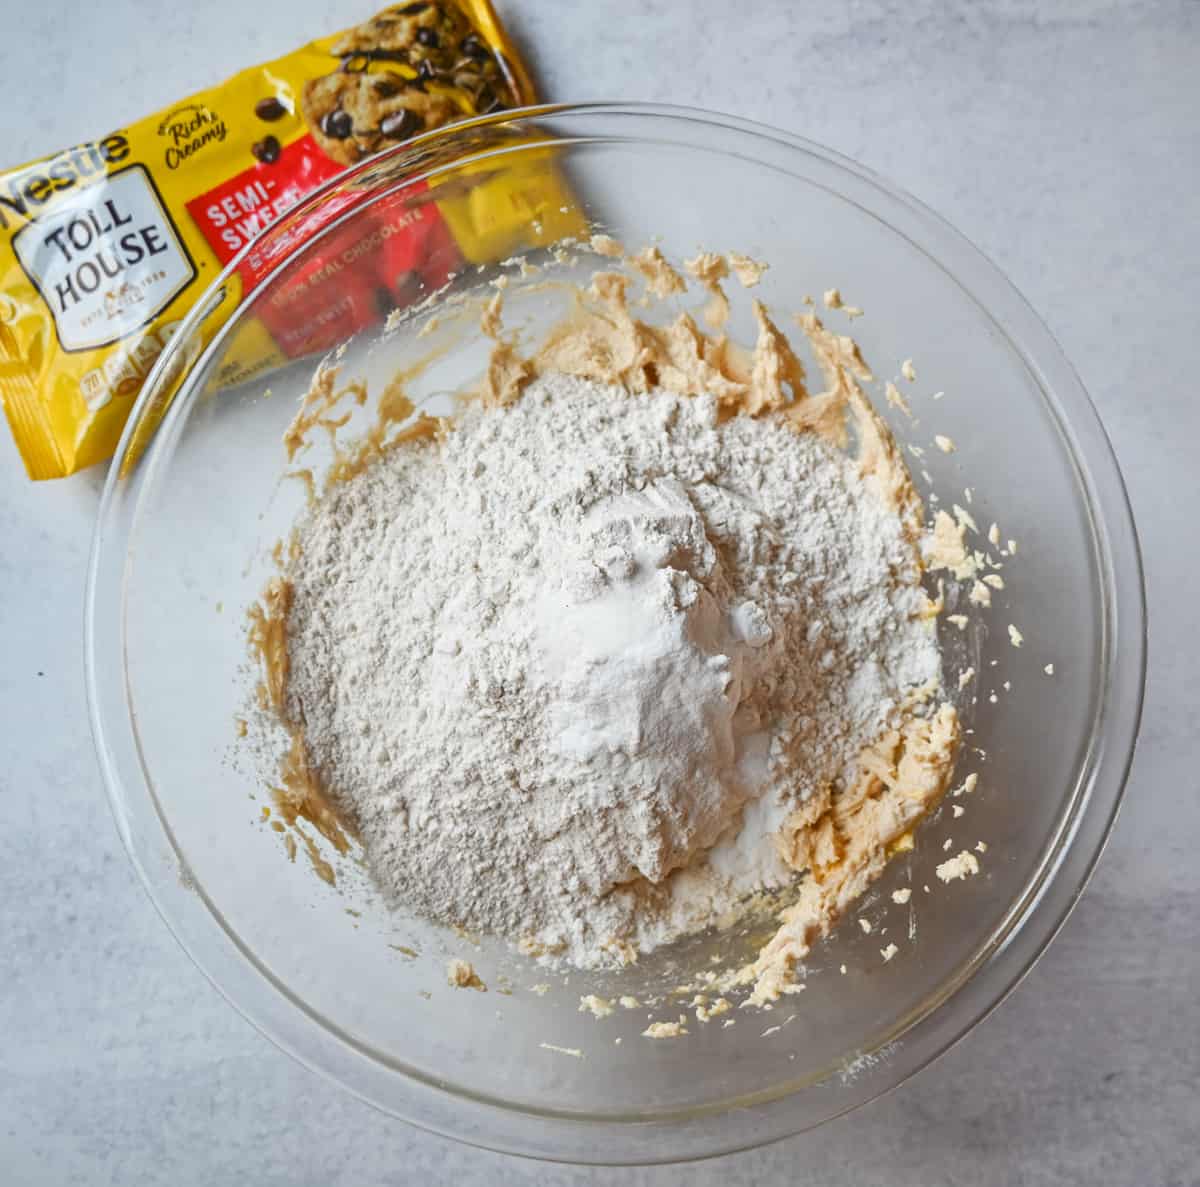 Fold in flour, baking soda, and salt into Nestle Toll House cookie dough